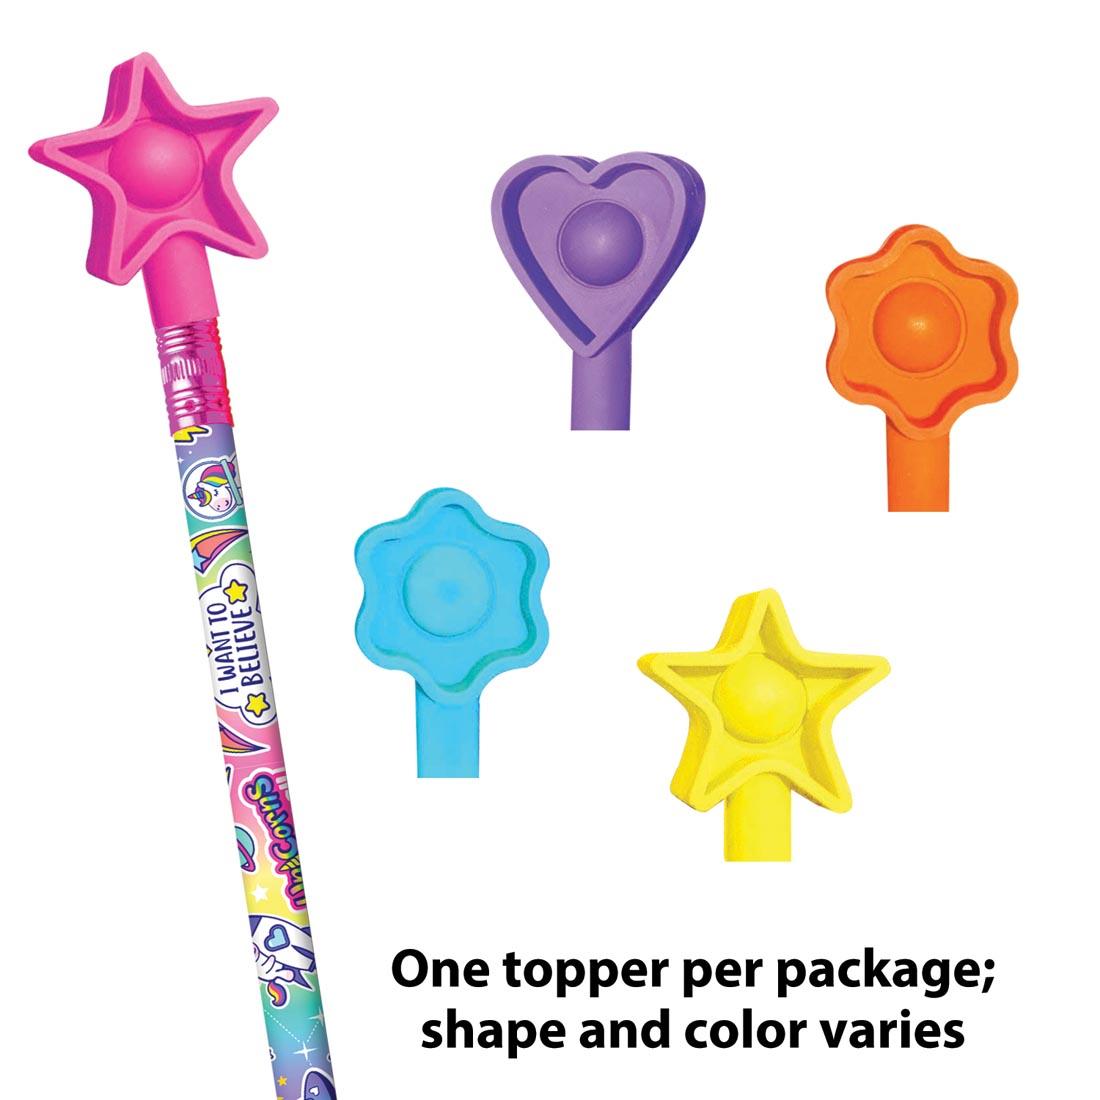 Four Pencil Popper Toppers plus one on a pencil and the text One topper per package; shape and color varies